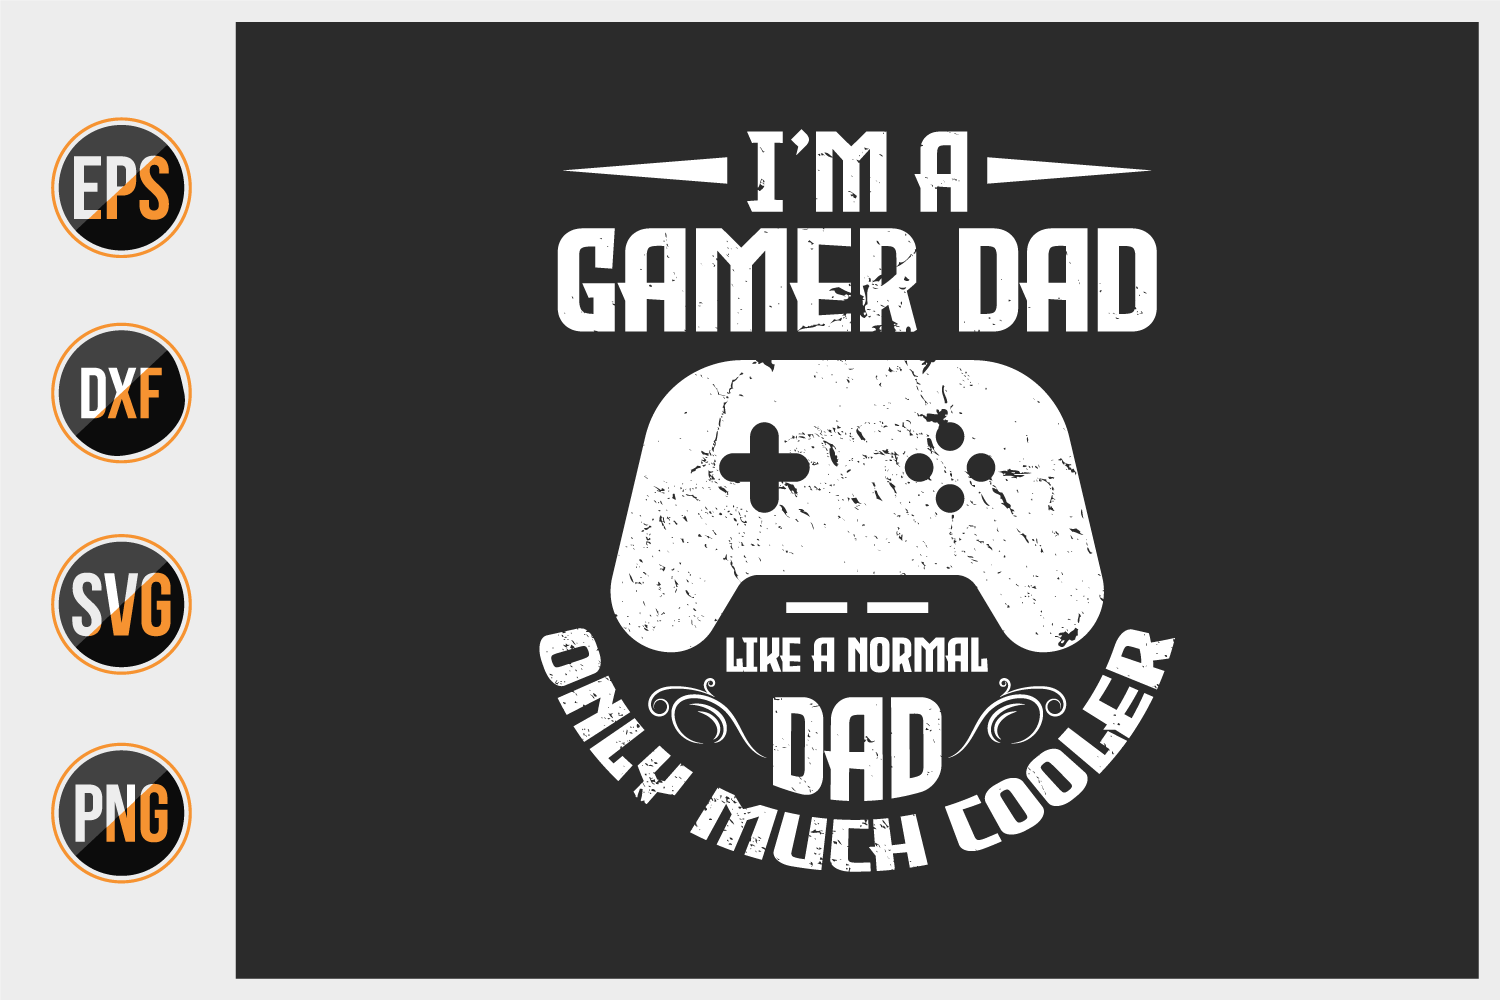 Gamer dad. Gamer dad logo. Only dad. Only dad блогер. Your dad like